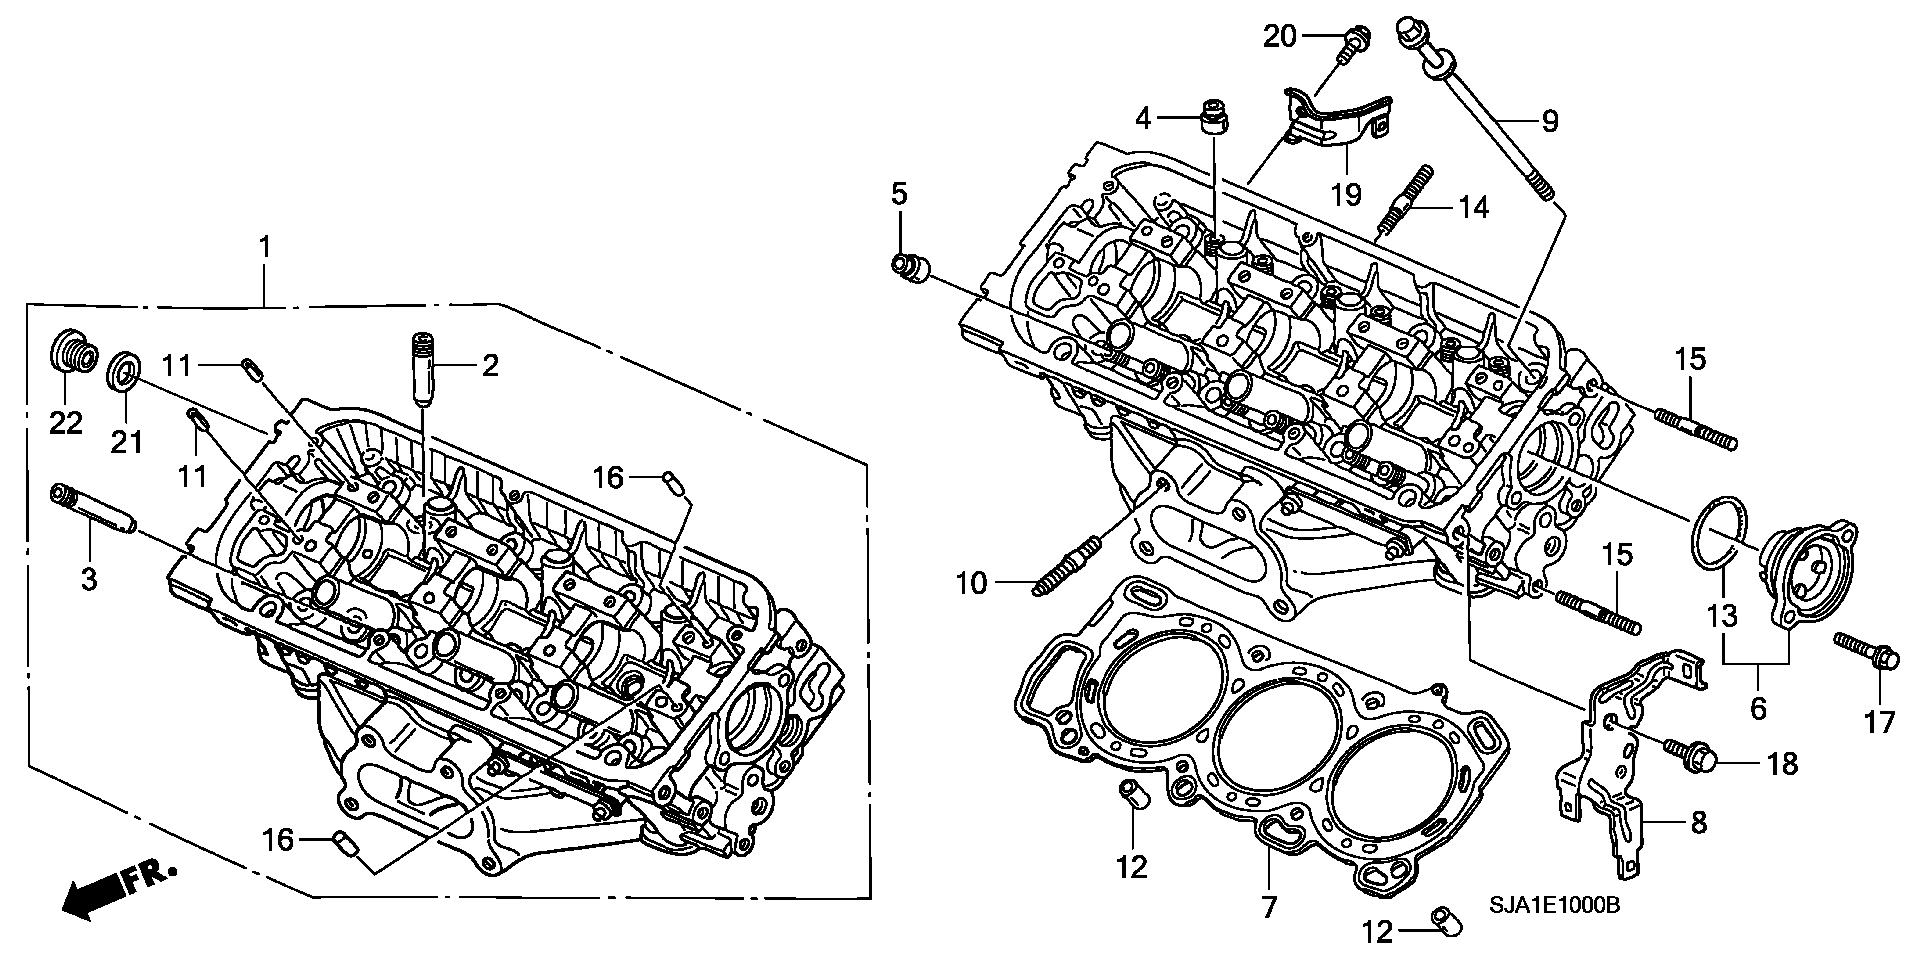 FRONT CYLINDER HEAD(1)